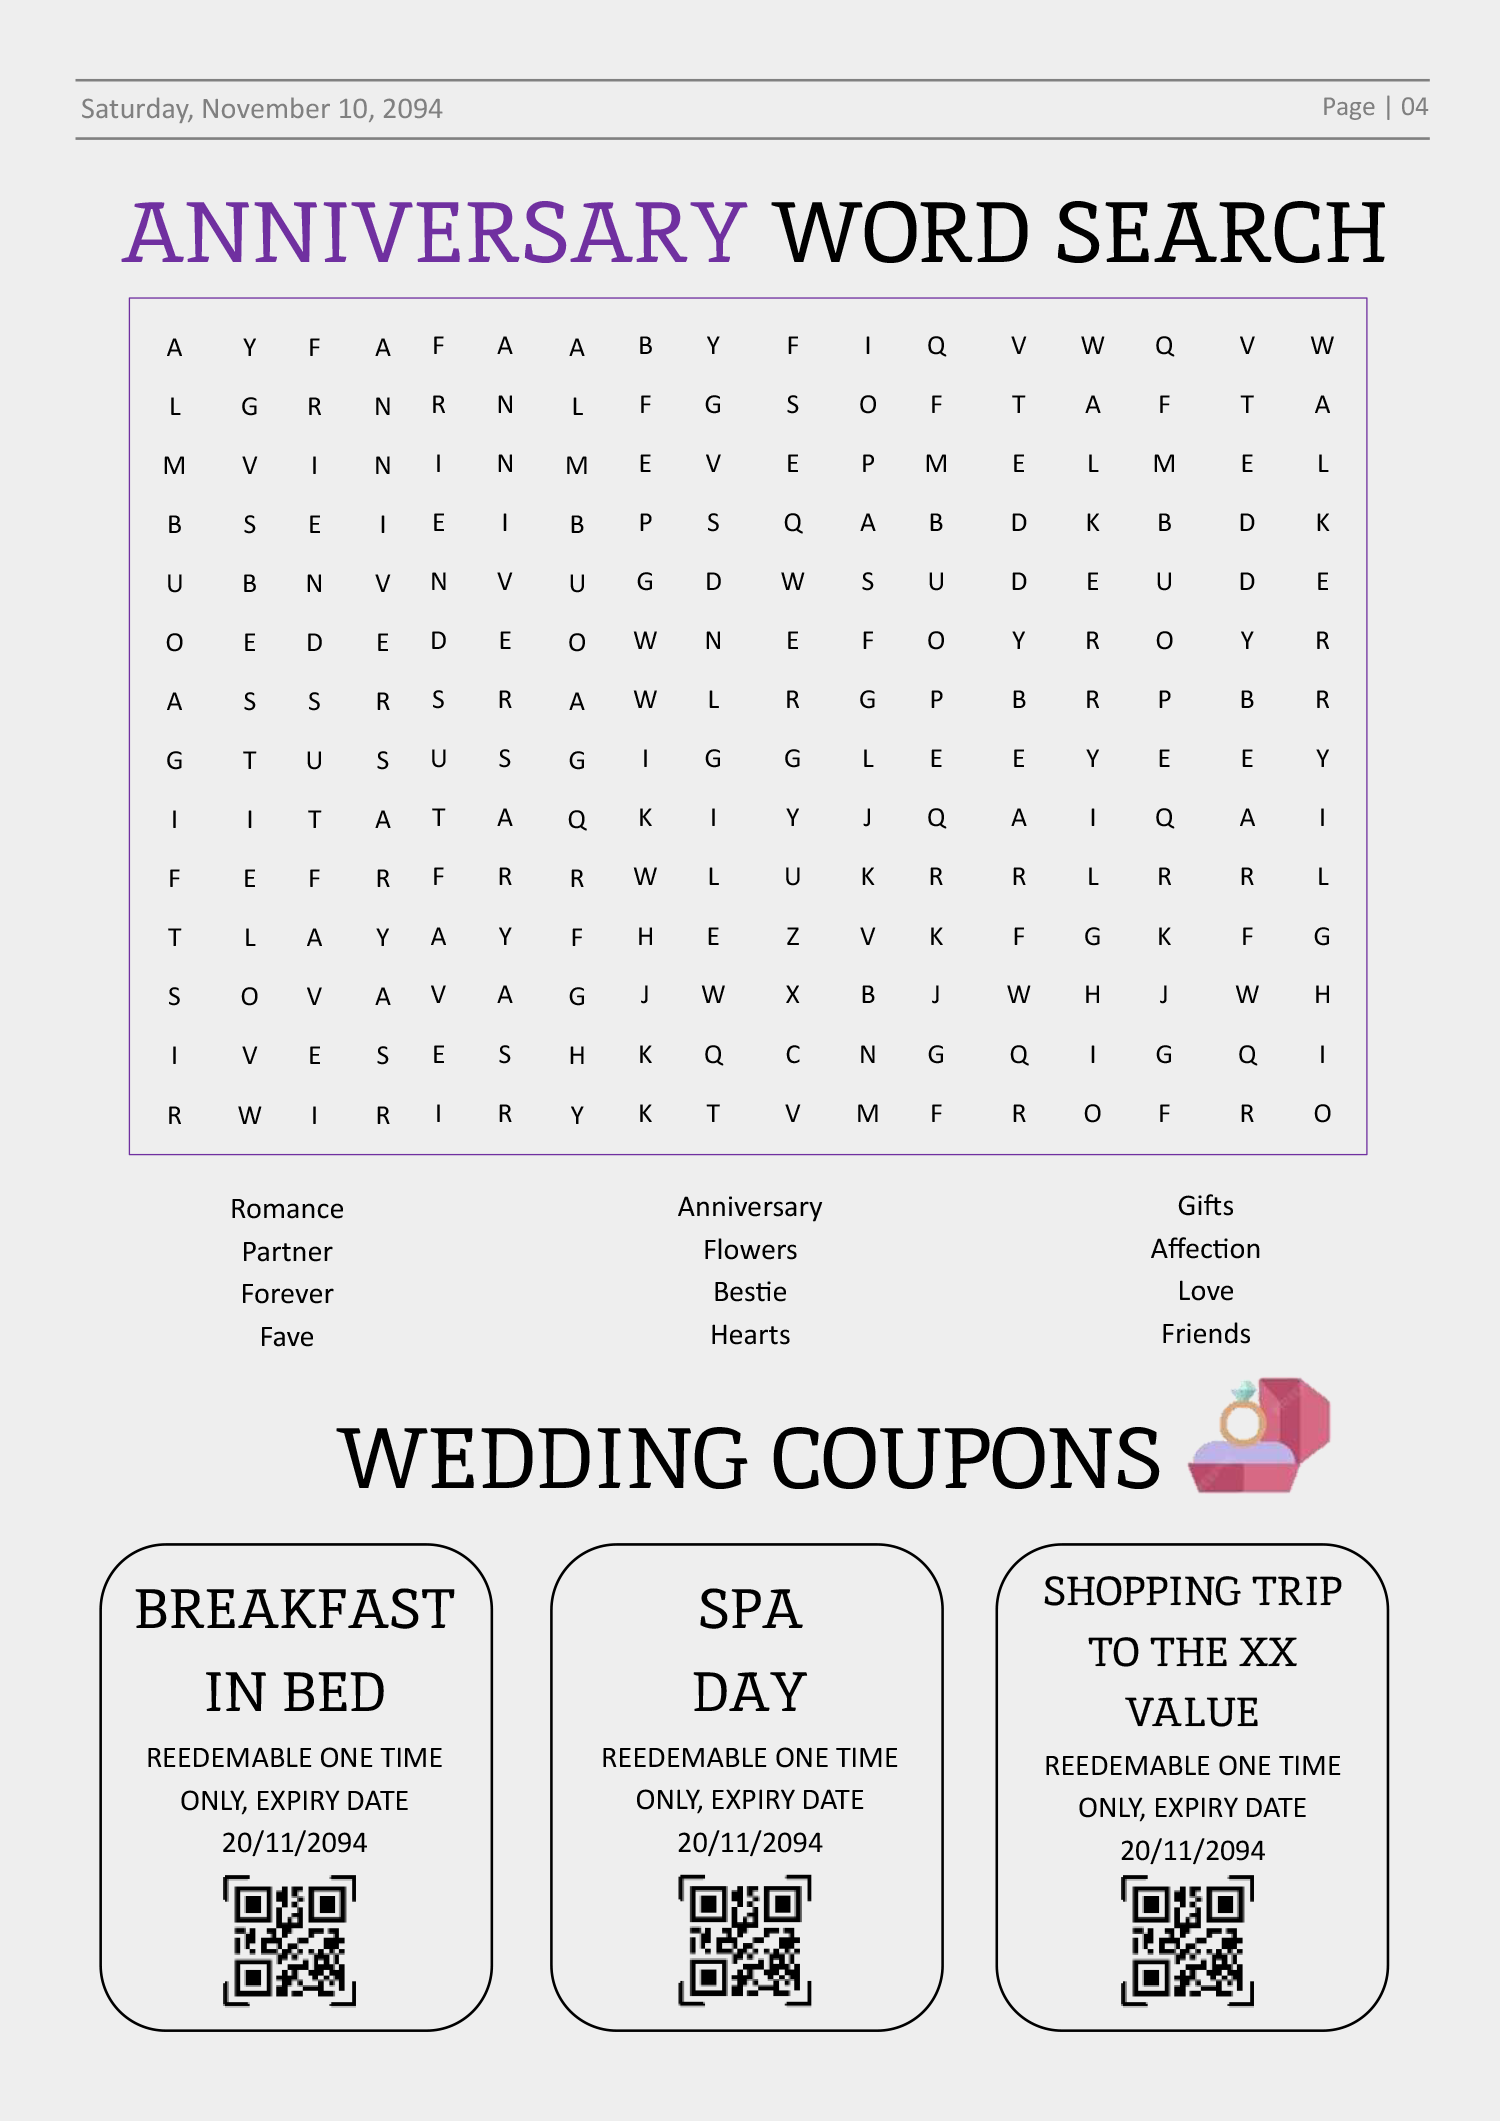 One year Wedding Anniversary Newspaper Template - Page 04